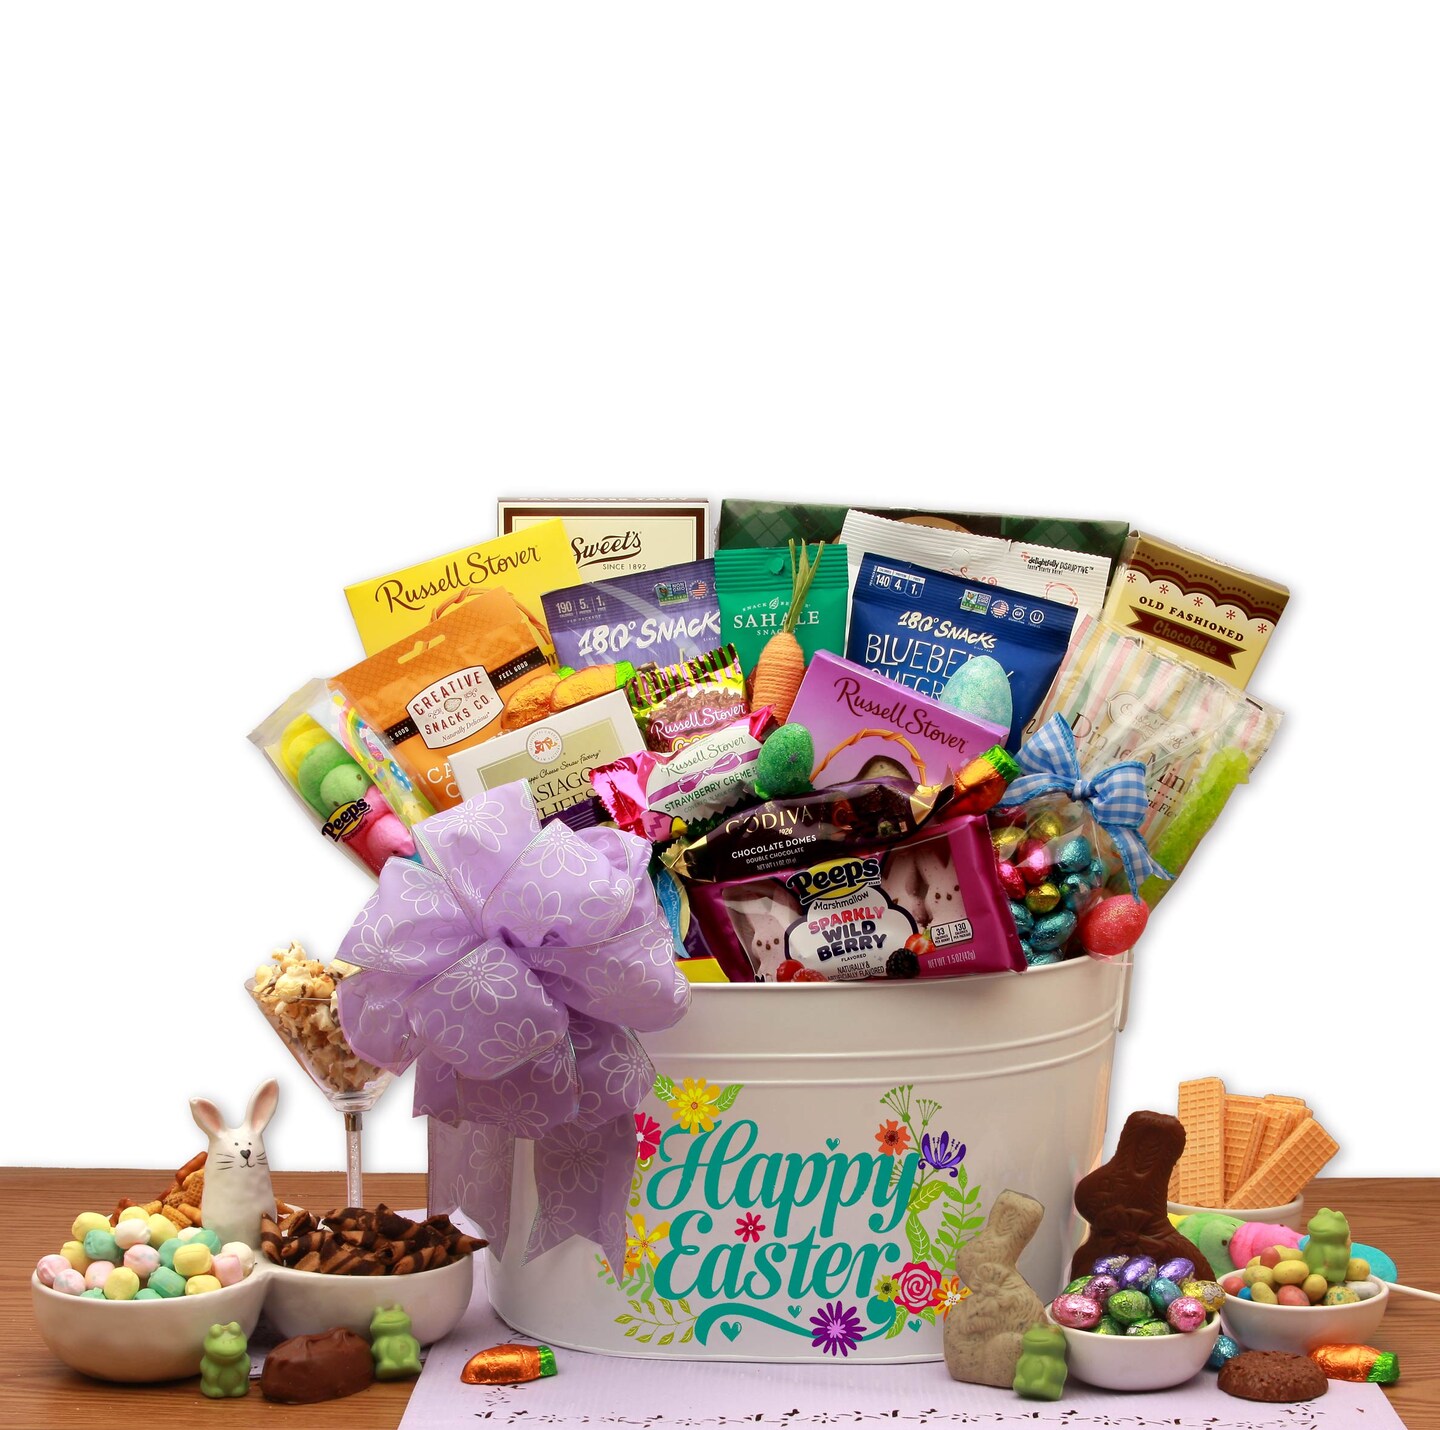 GBDS Easter Gift Basket - Our Best Easter Wishes Deluxe Gift Basket